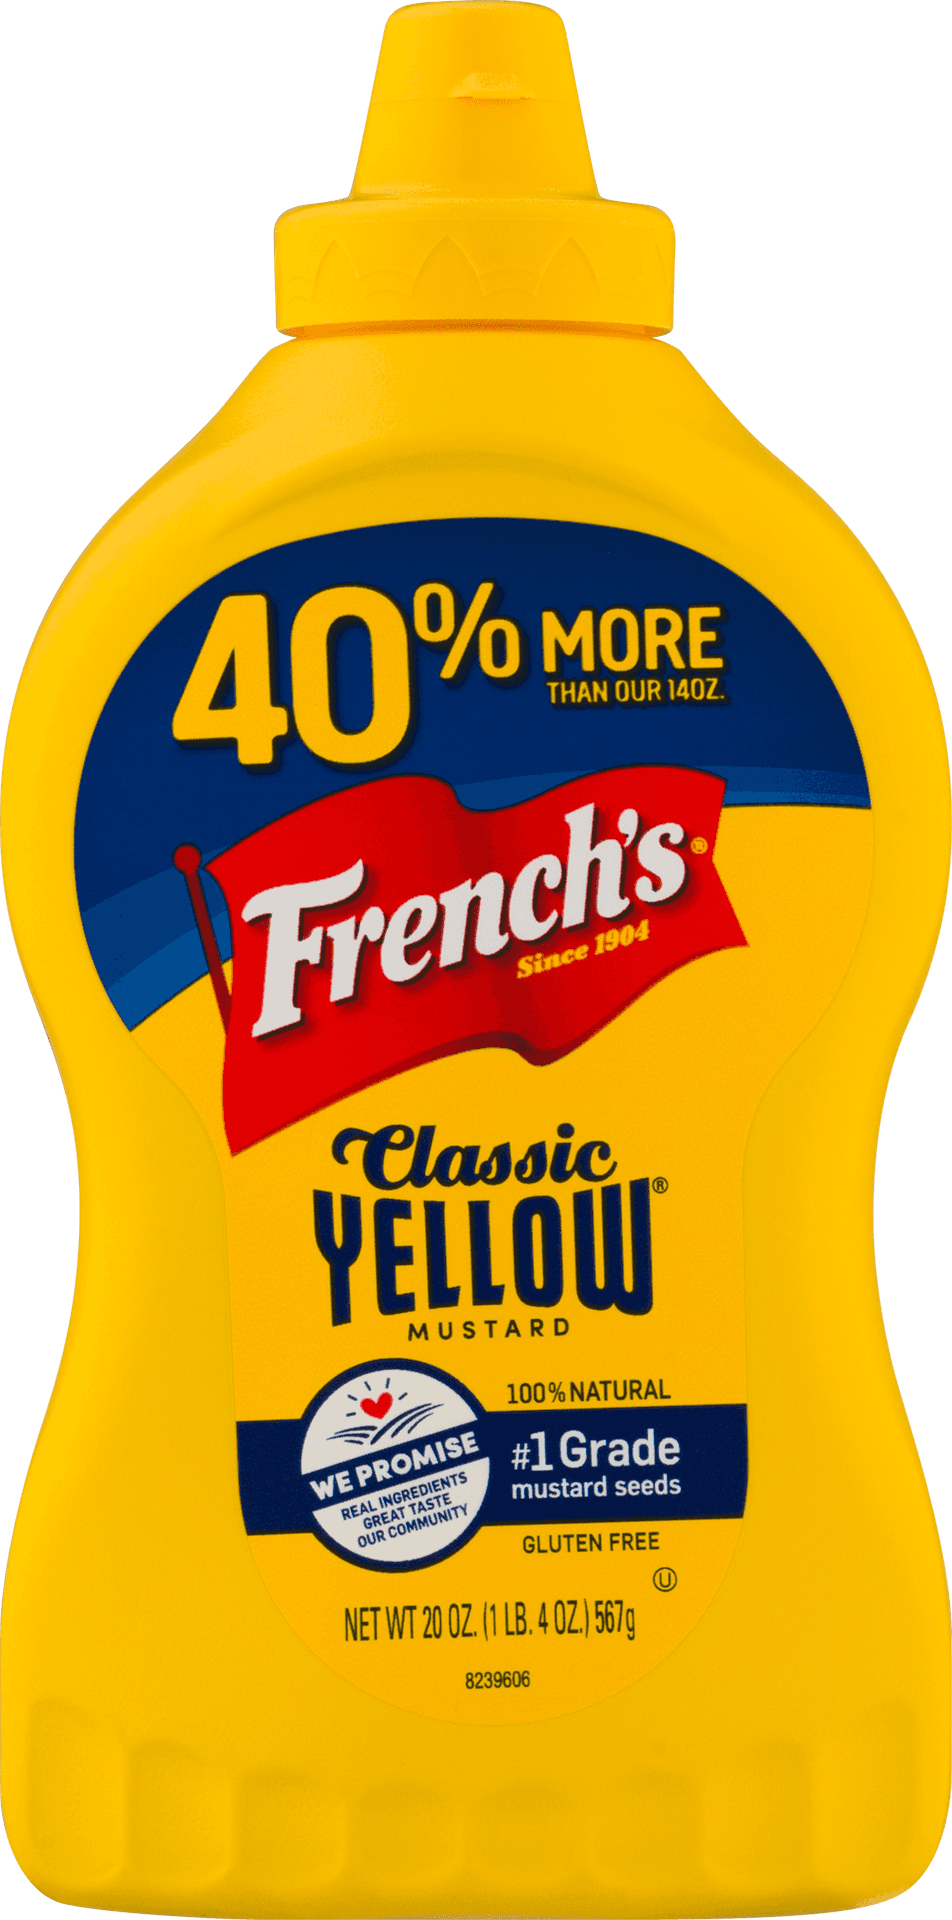 Frenchs Classic Yellow Mustard Bottle PNG